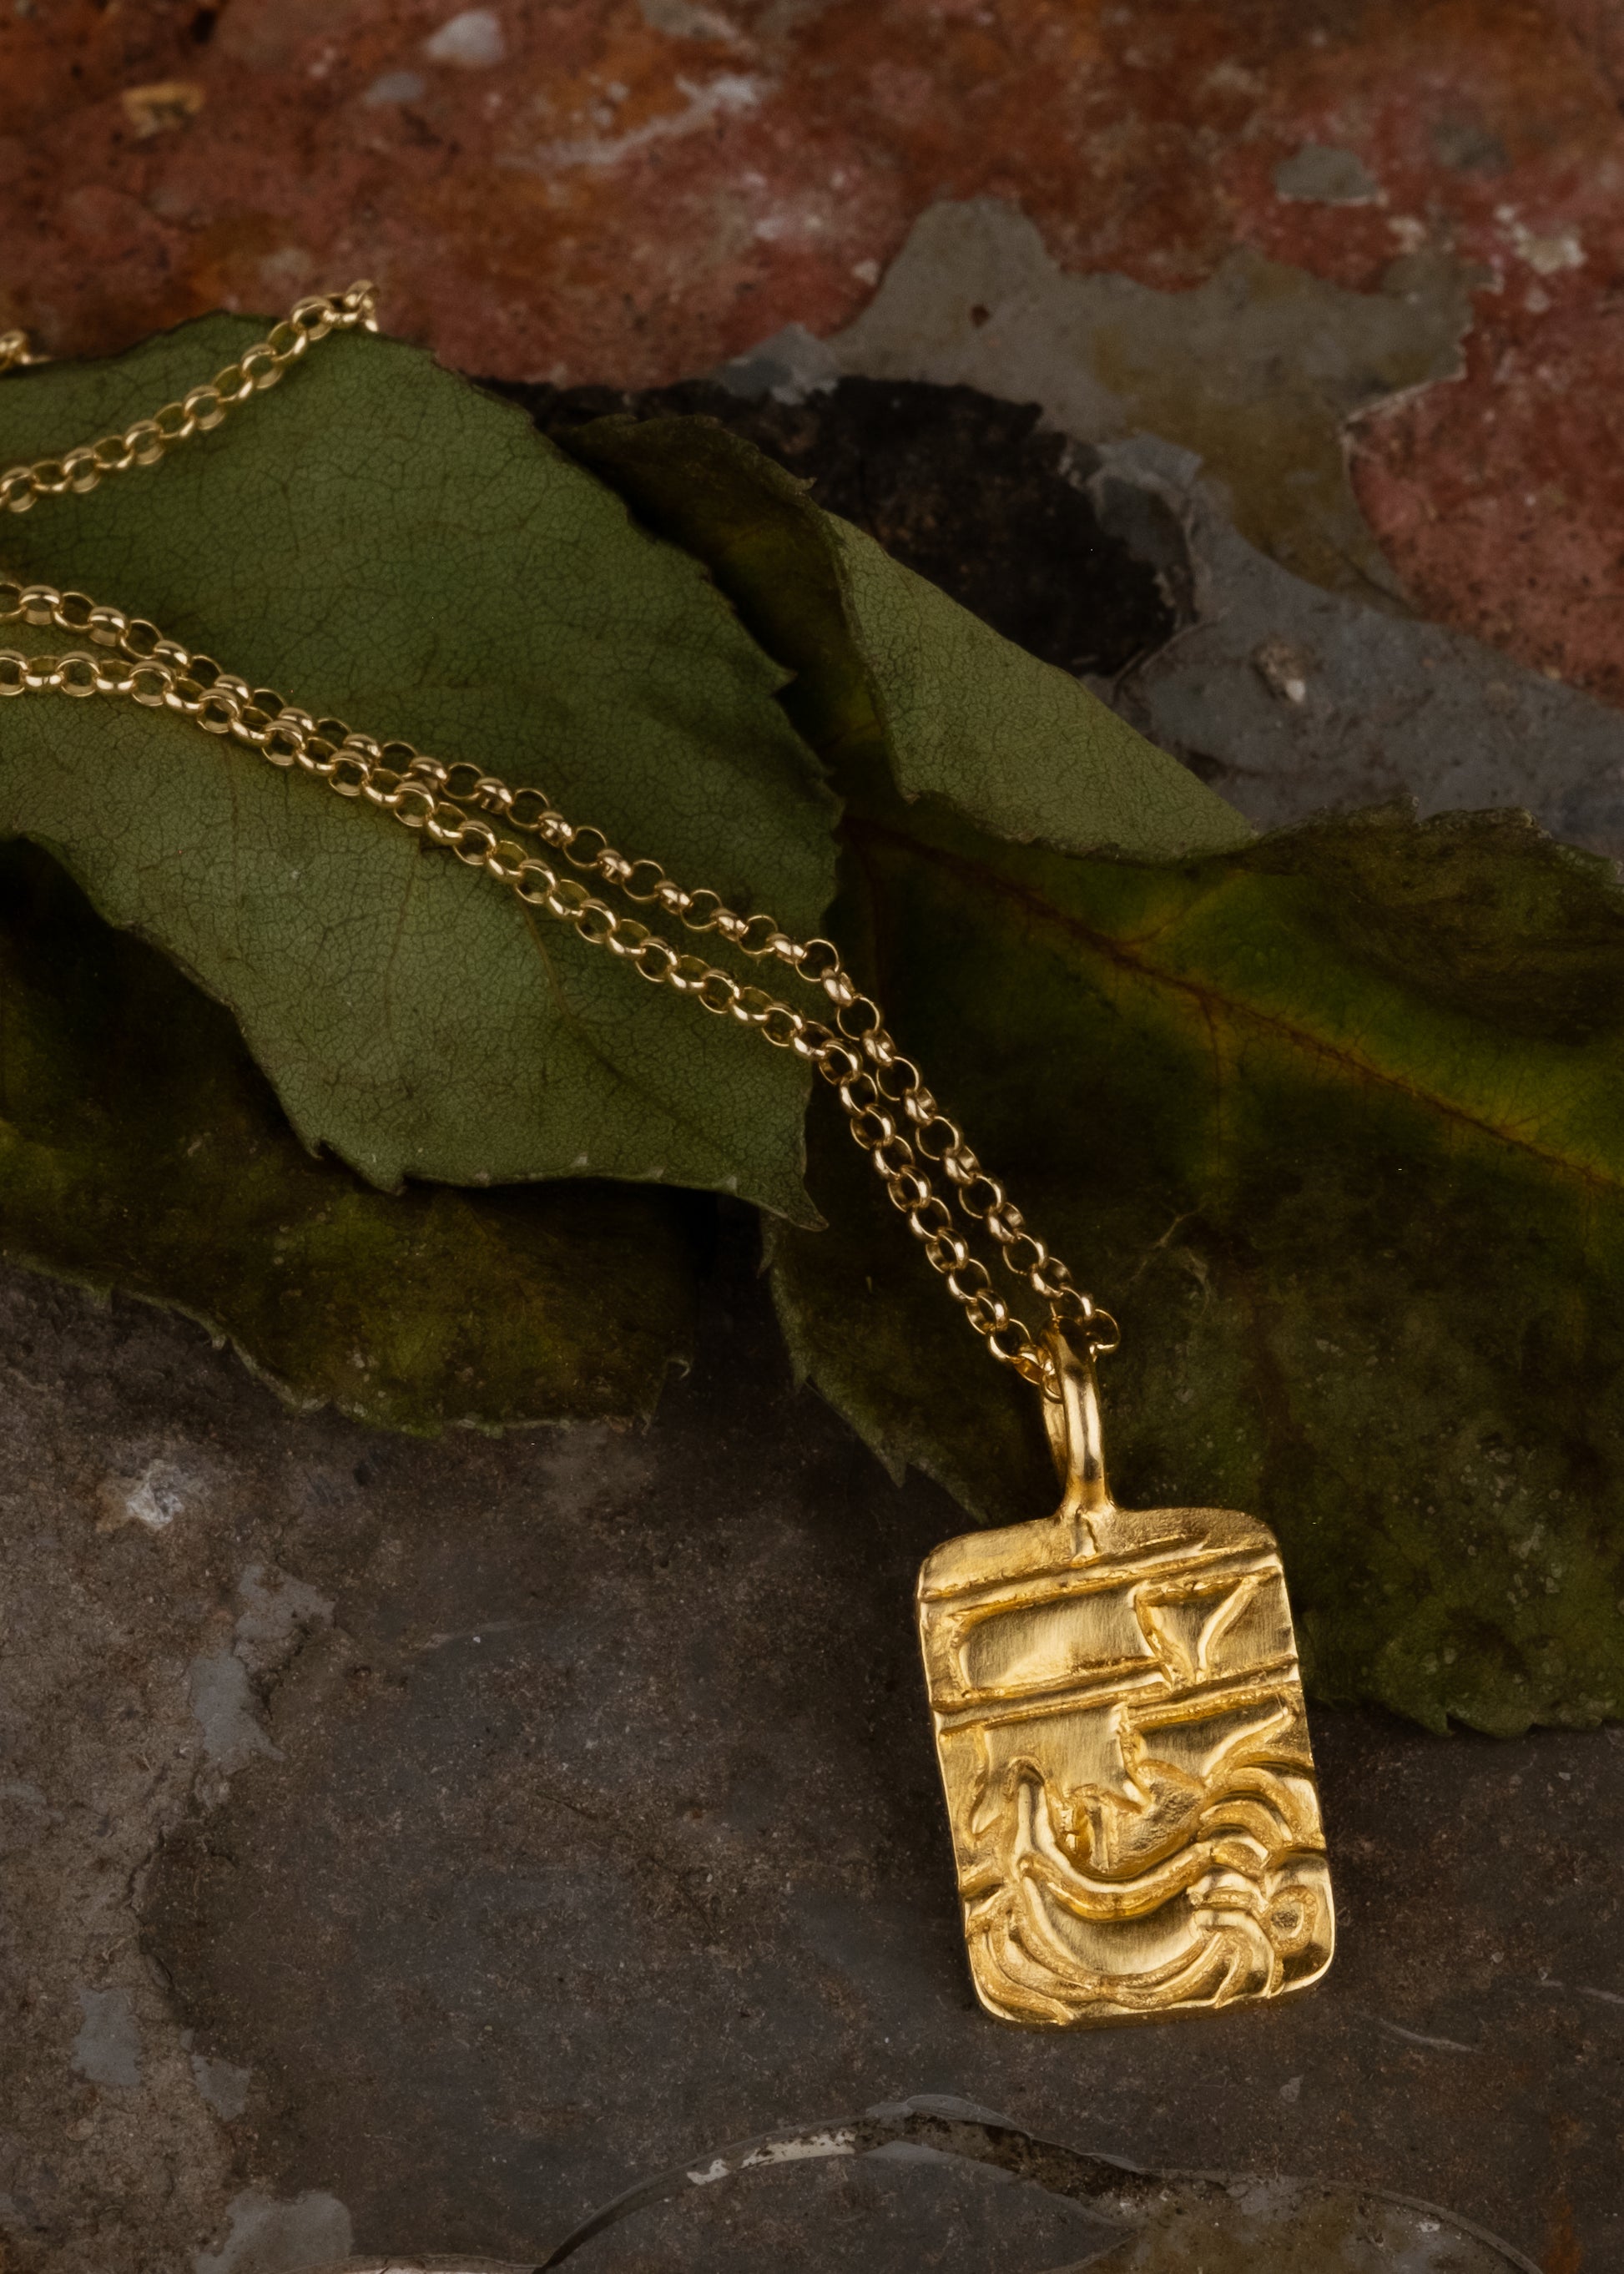 Arising from the swells of a stormy sea, the hand-carved ship of the Phantom necklace graces this substantial rectangular pendant— a timeless piece that echoes the mythic adventures of days past. 